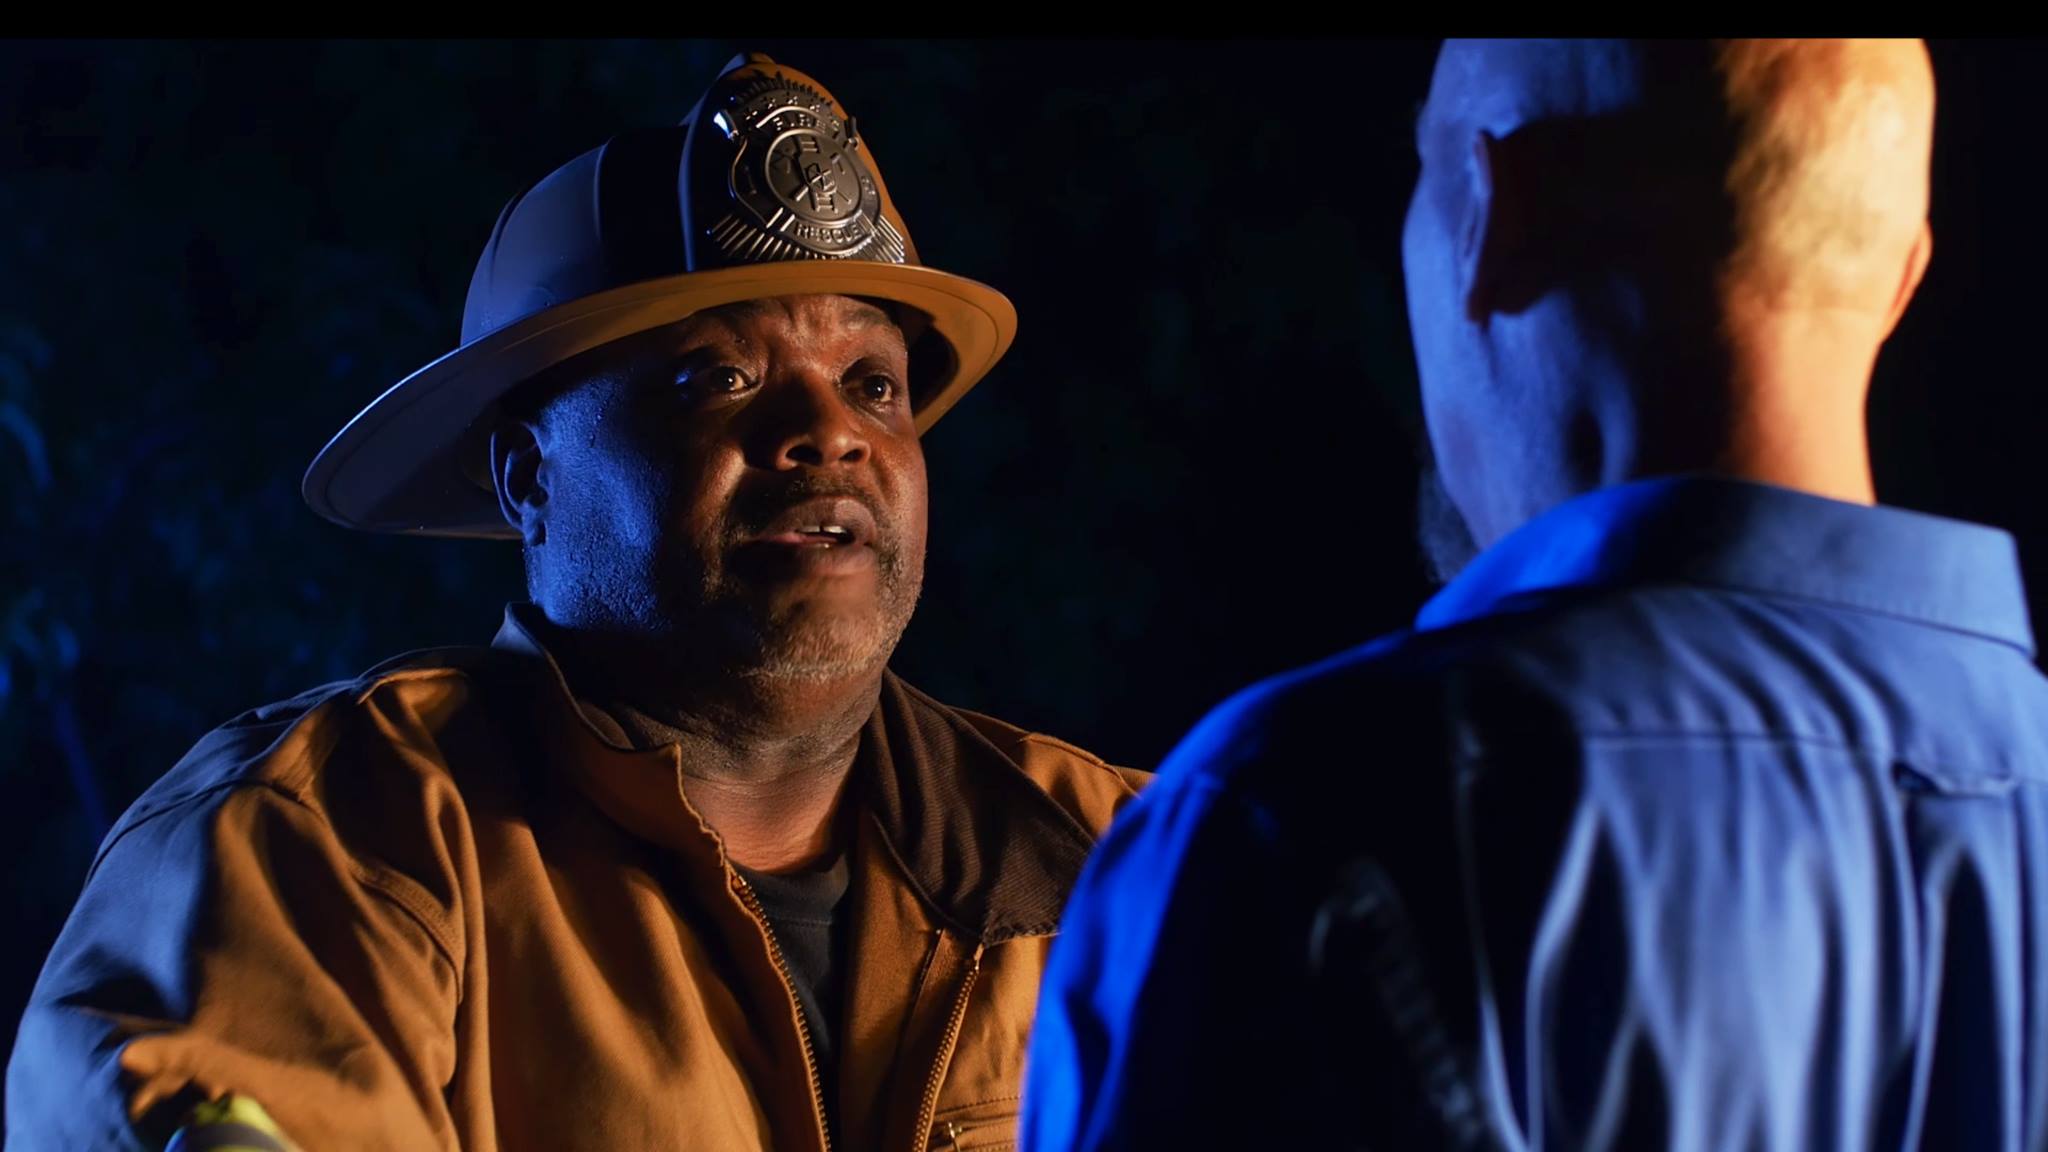 Clark Harris Fire Chief in the Indie film Molly